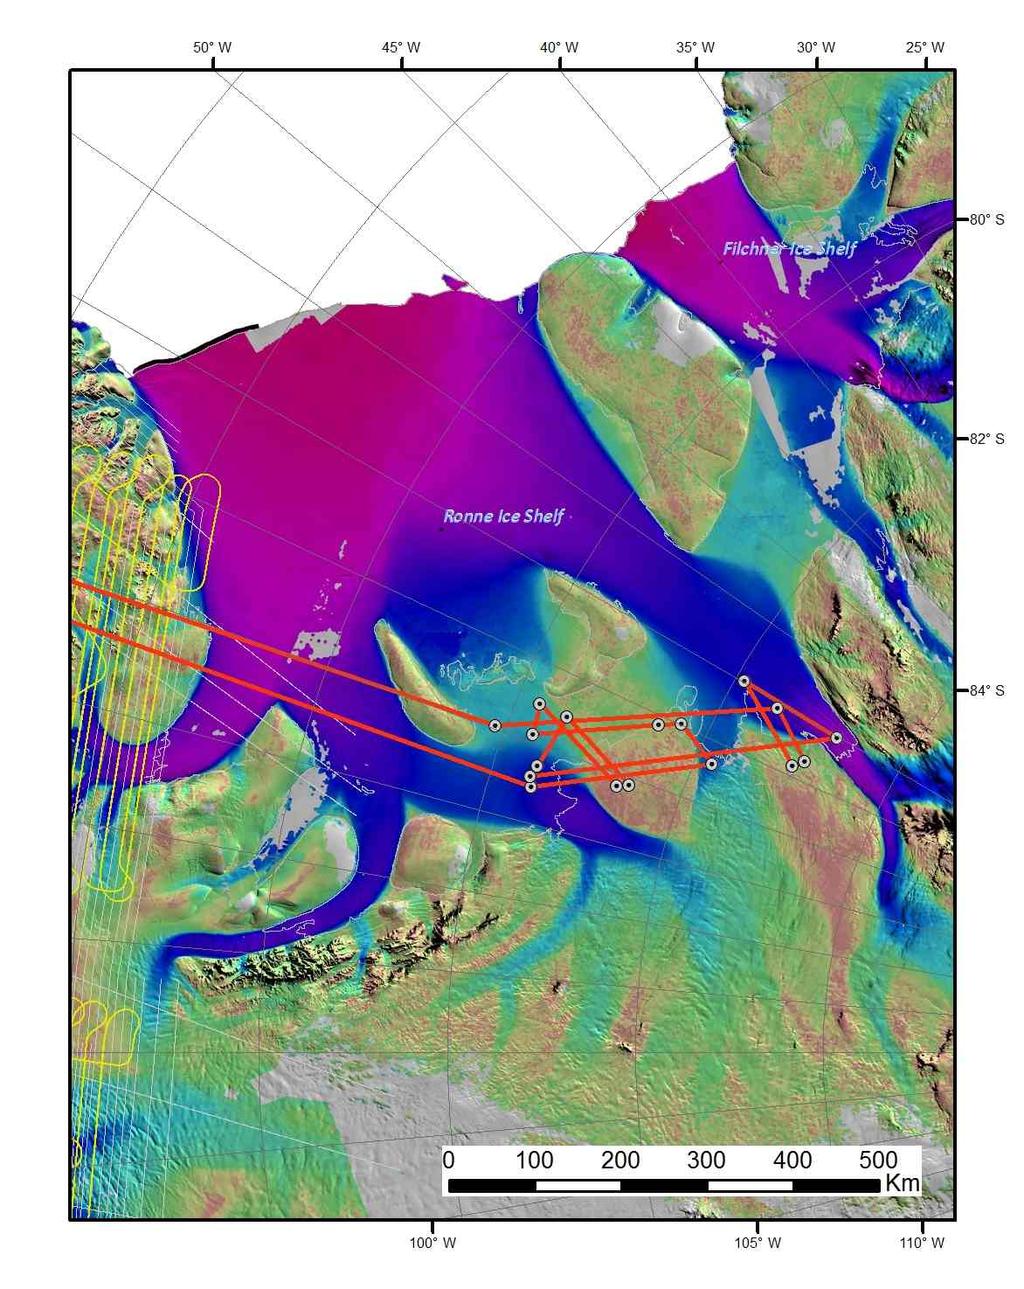 LVIS 2012 Antarctica Mapping Lines 7/13/12 16 Institute Moller Flight: Priority 2 High? Moved from DC8 plans.